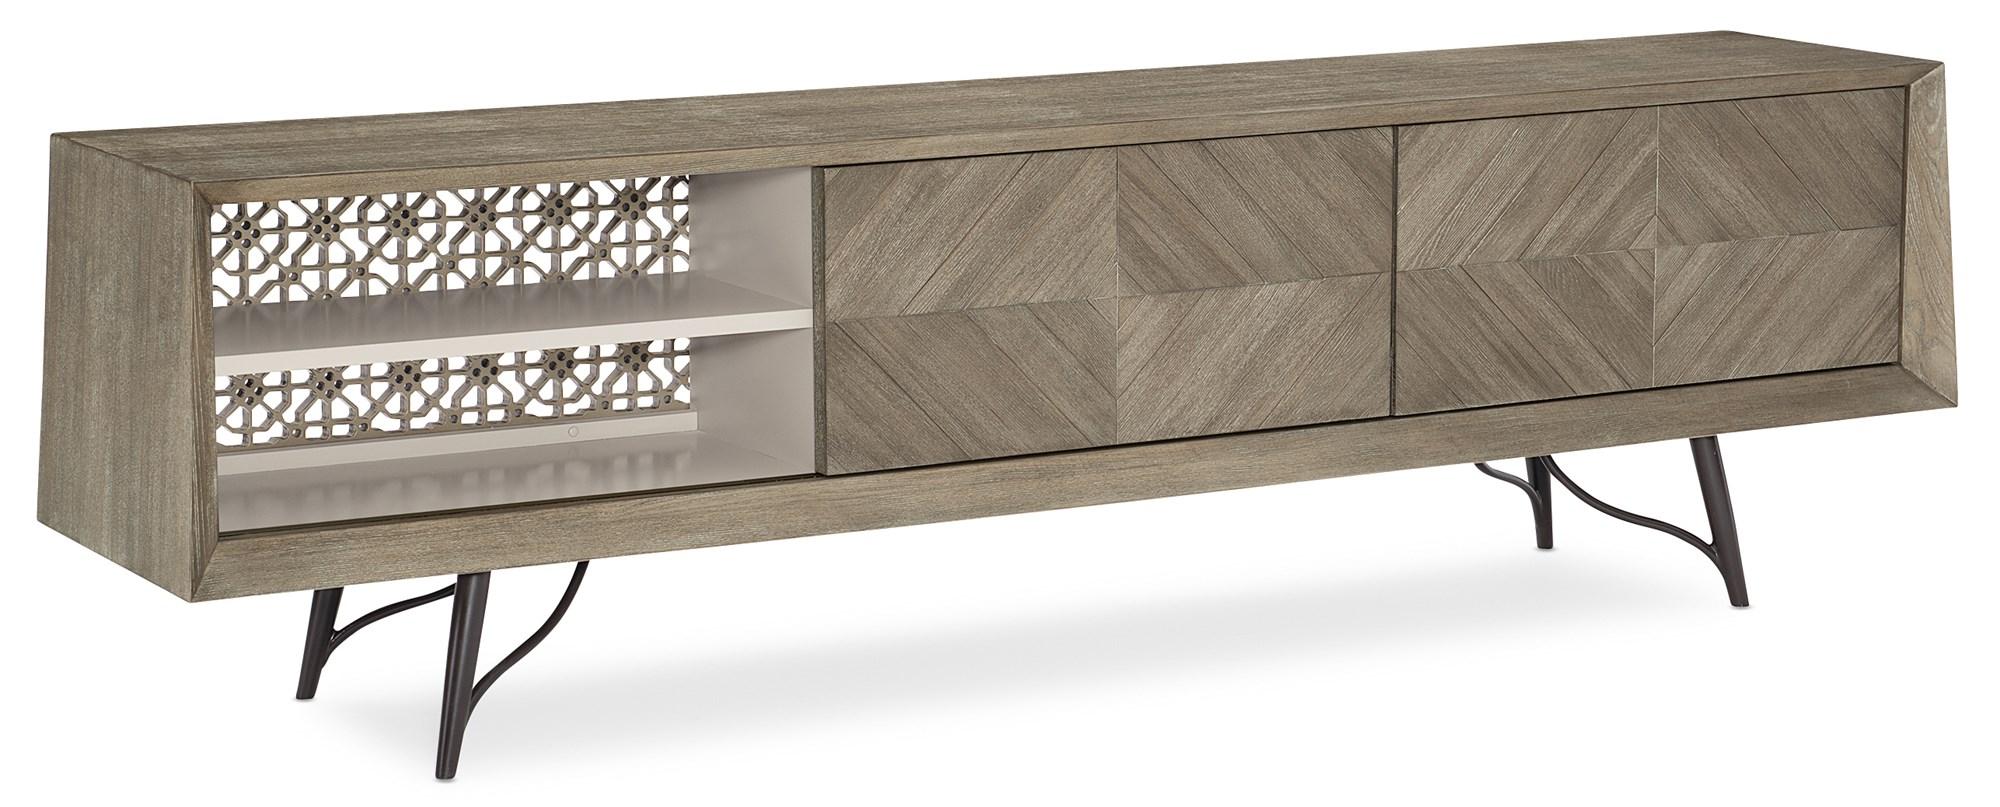 Modern Console Table A CUT ABOVE CLA-019-533 in Driftwood, Gray 